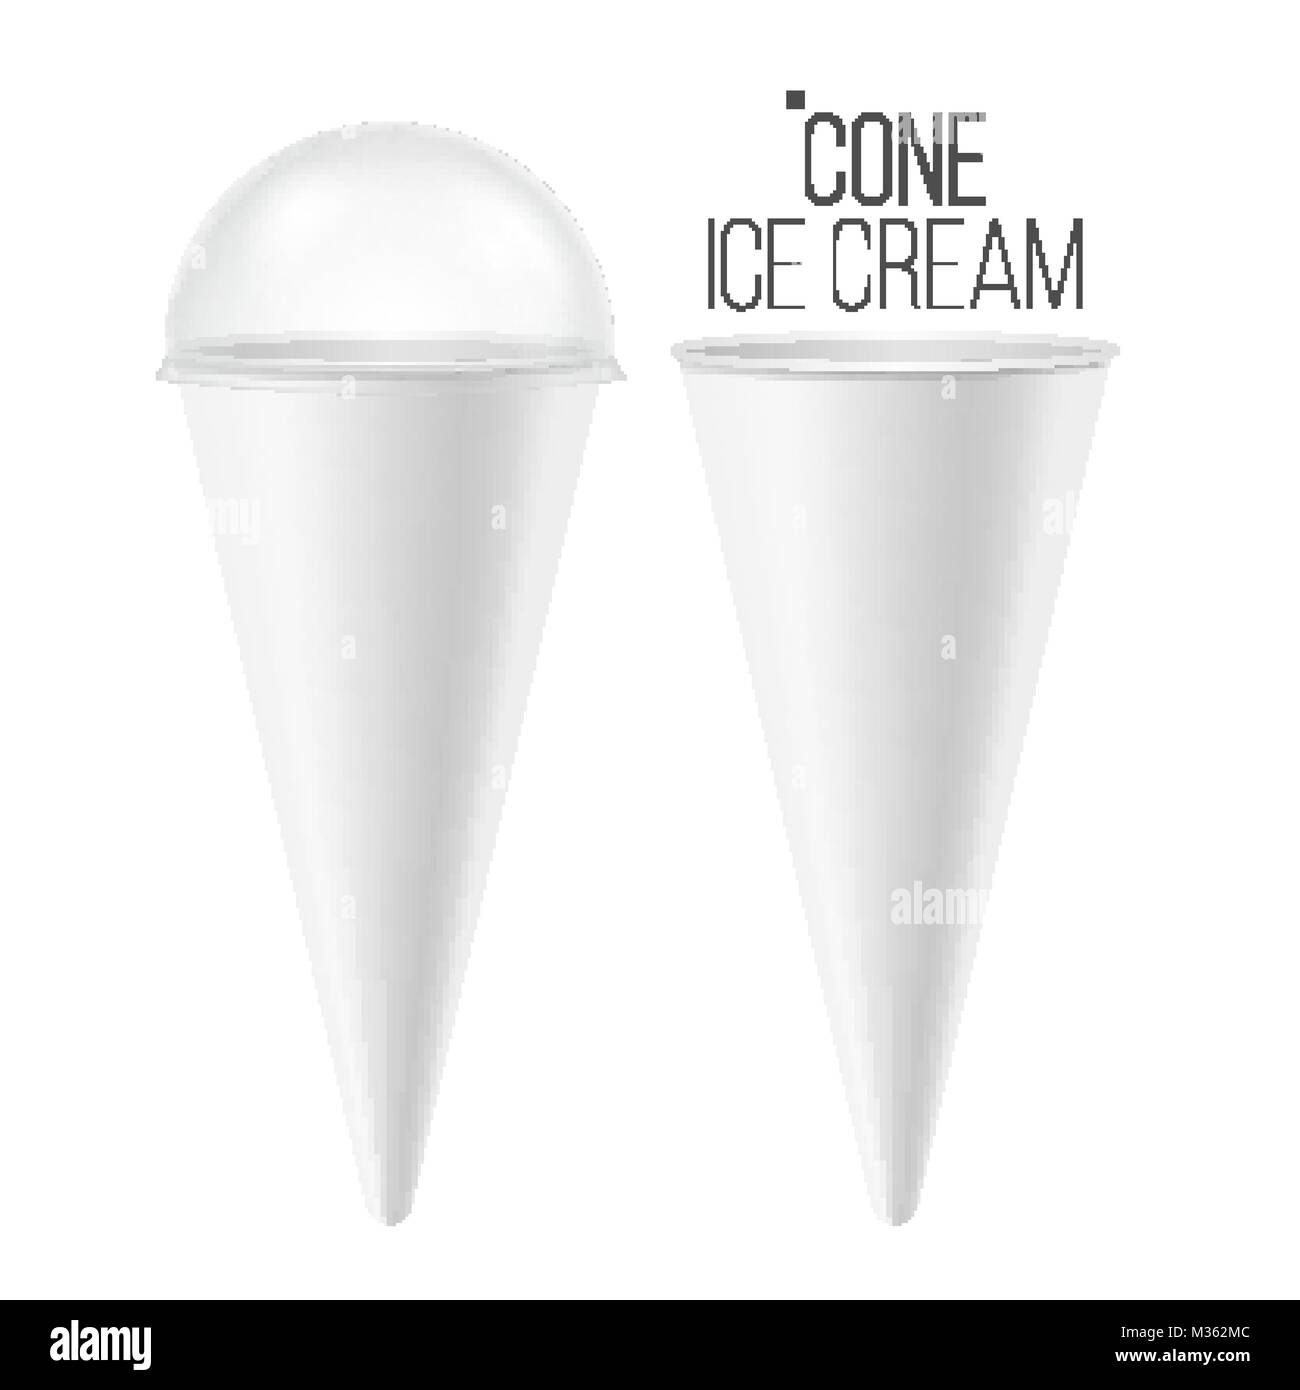 Ice Cream Cone Vector. For Ice Cream, Sour Cream. Clean Packaging. Food Bucket Cone Container. Isolated On White Background Illustration. Stock Vector